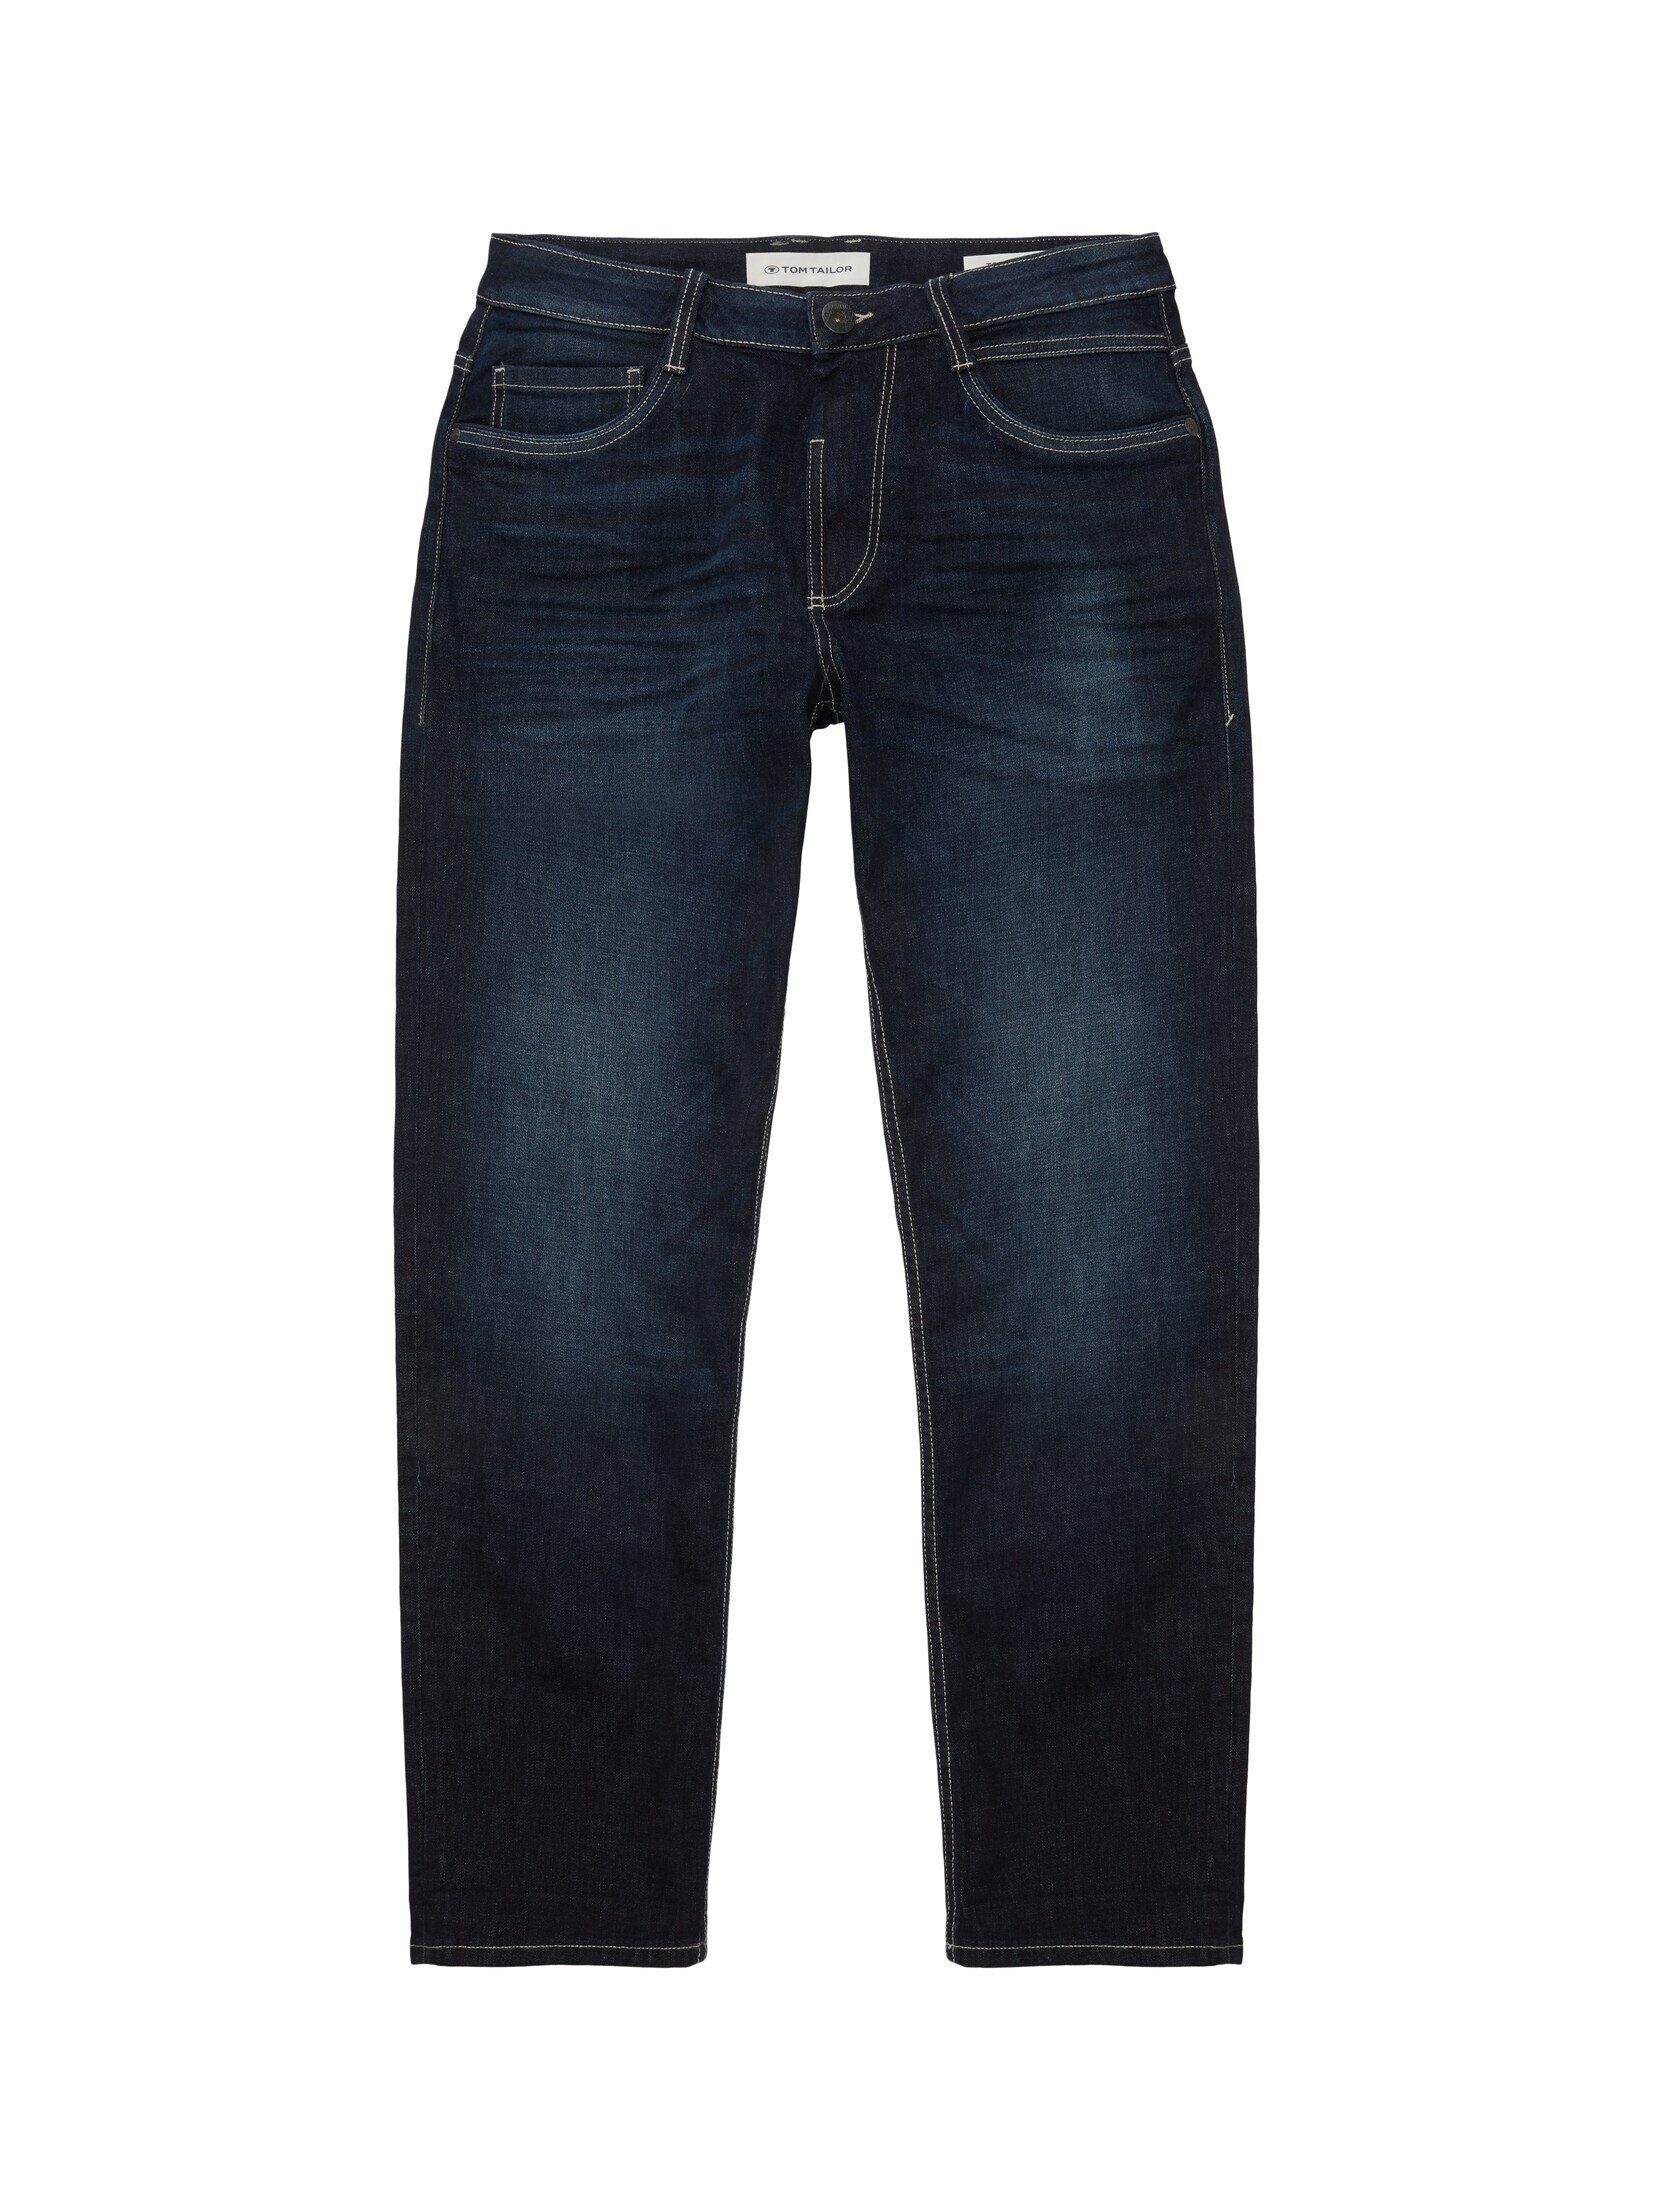 TOM TAILOR Straight-Jeans Denim Jeans Blue Trad Used Relaxed Dark Stone